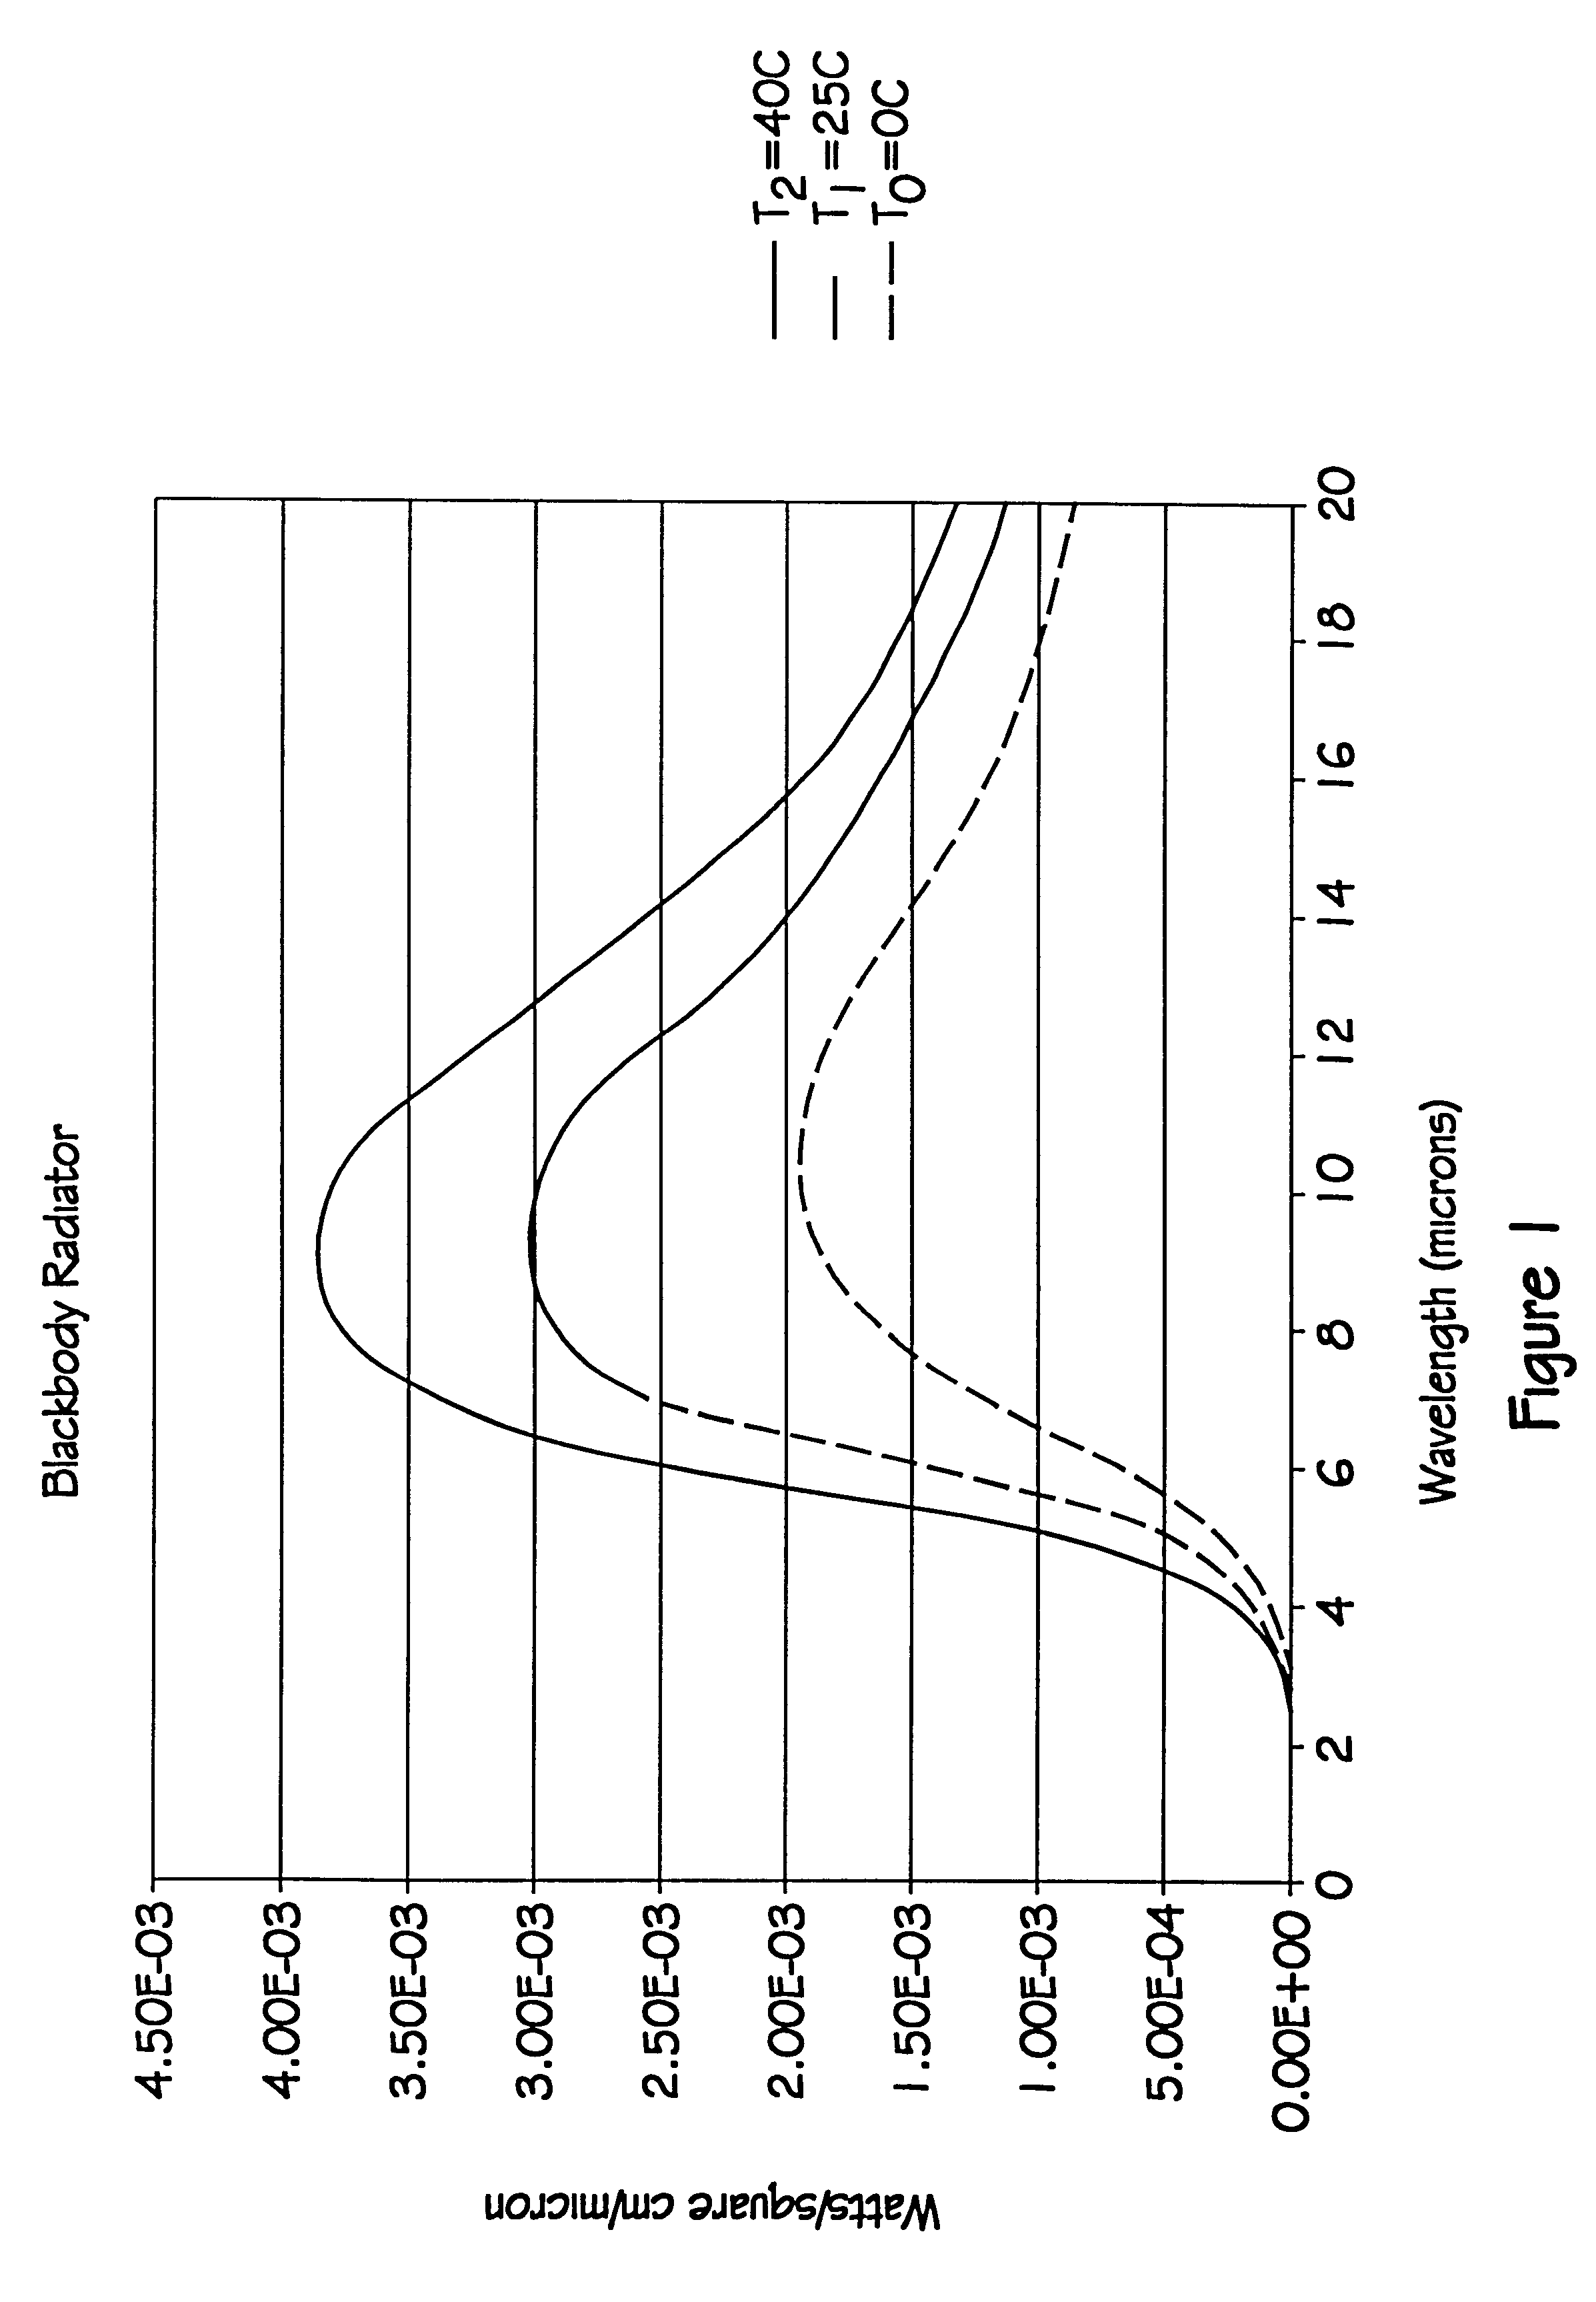 Method for determining analyte concentration using periodic temperature modulation and phase detection